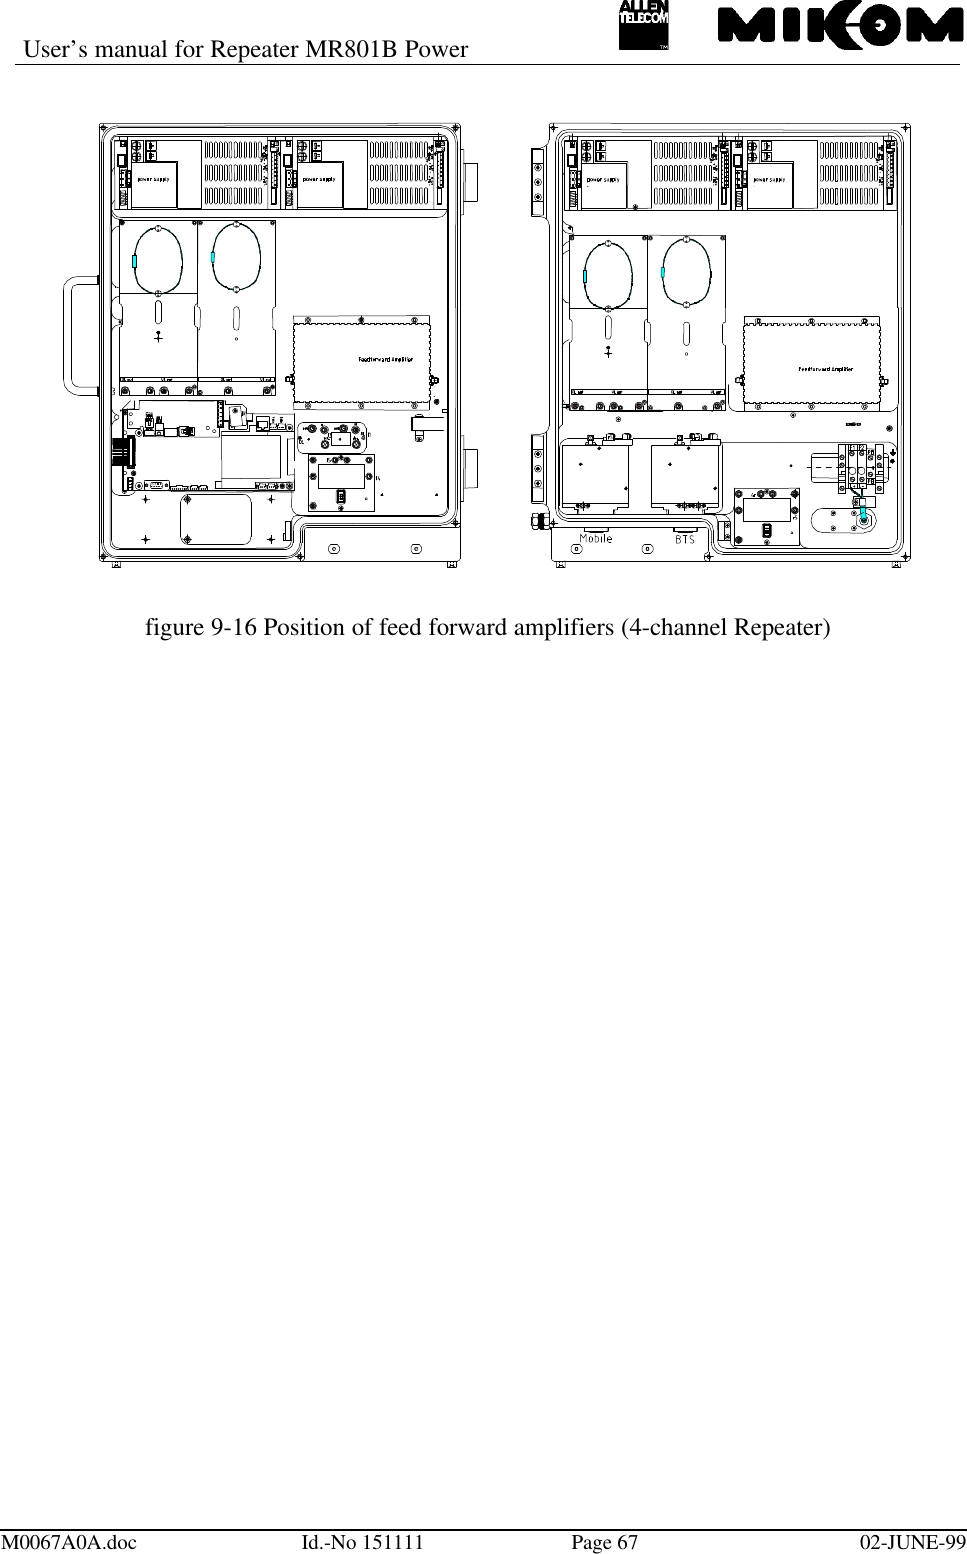 User’s manual for Repeater MR801B PowerM0067A0A.doc Id.-No 151111 Page 67 02-JUNE-99figure 9-16 Position of feed forward amplifiers (4-channel Repeater)